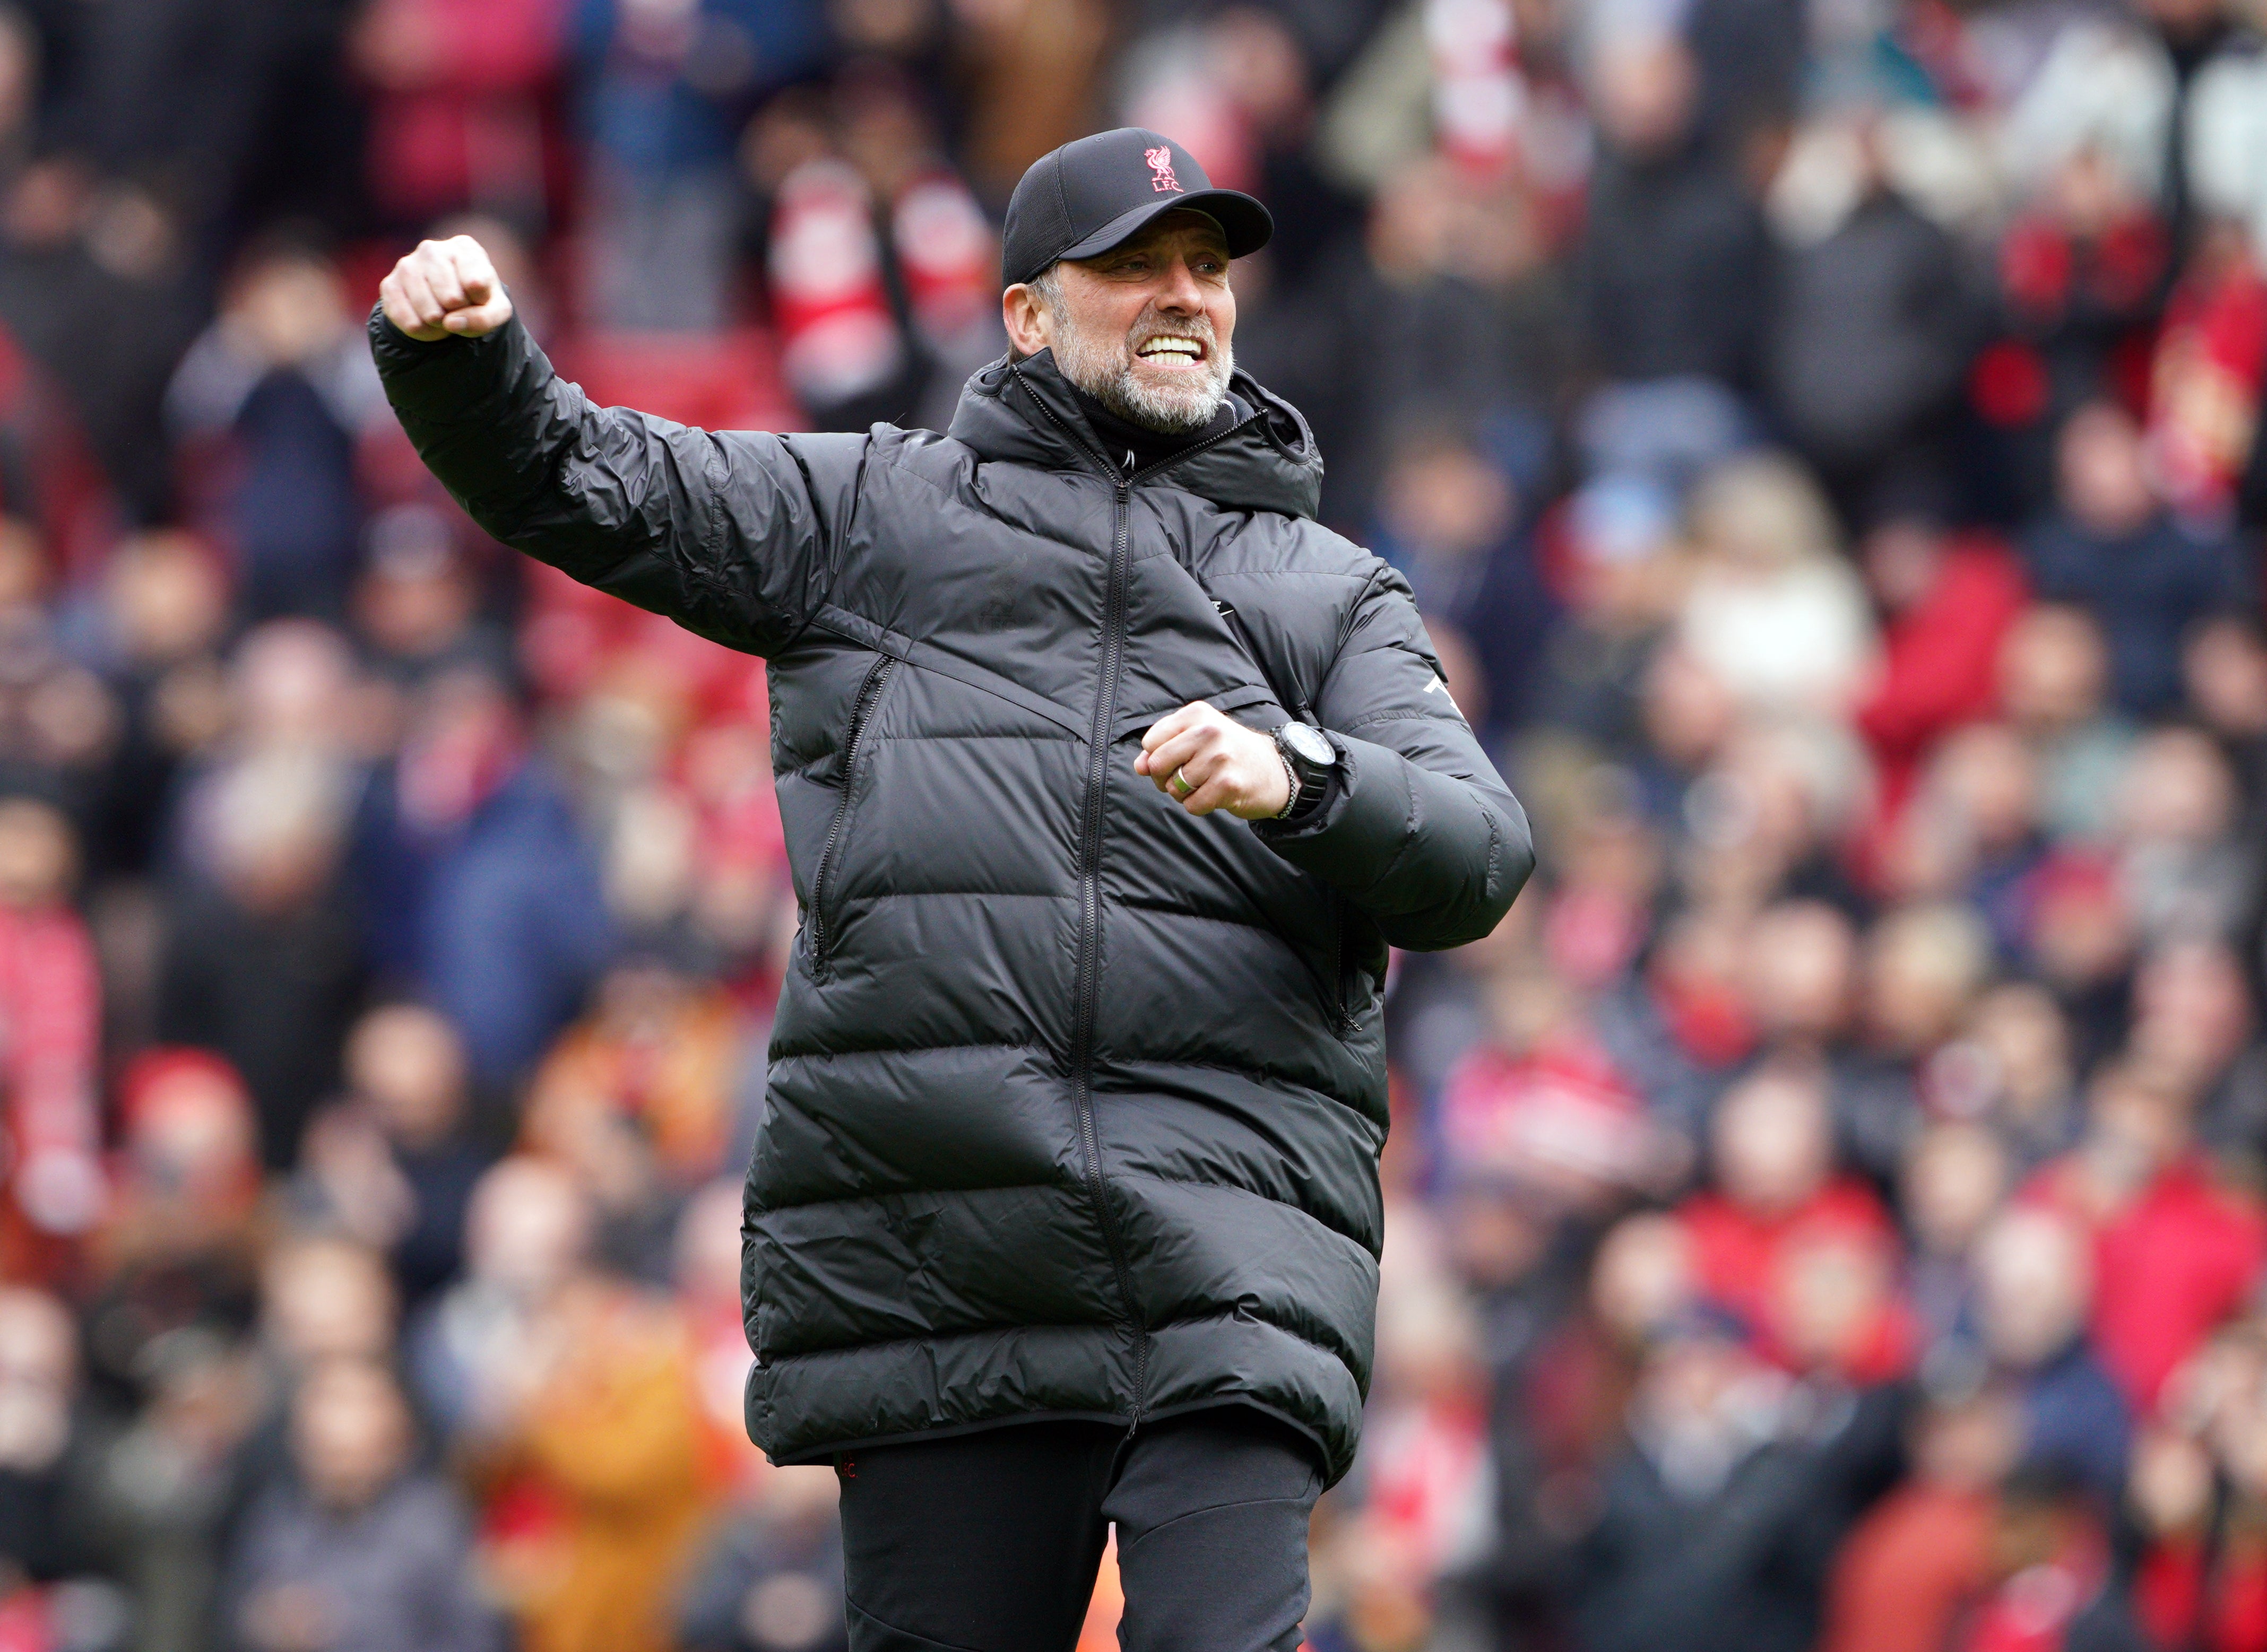 Liverpool manager Jurgen Klopp insists they have to go “all in” for their FA Cup semi-final against Manchester City (Peter Byrne/PA)